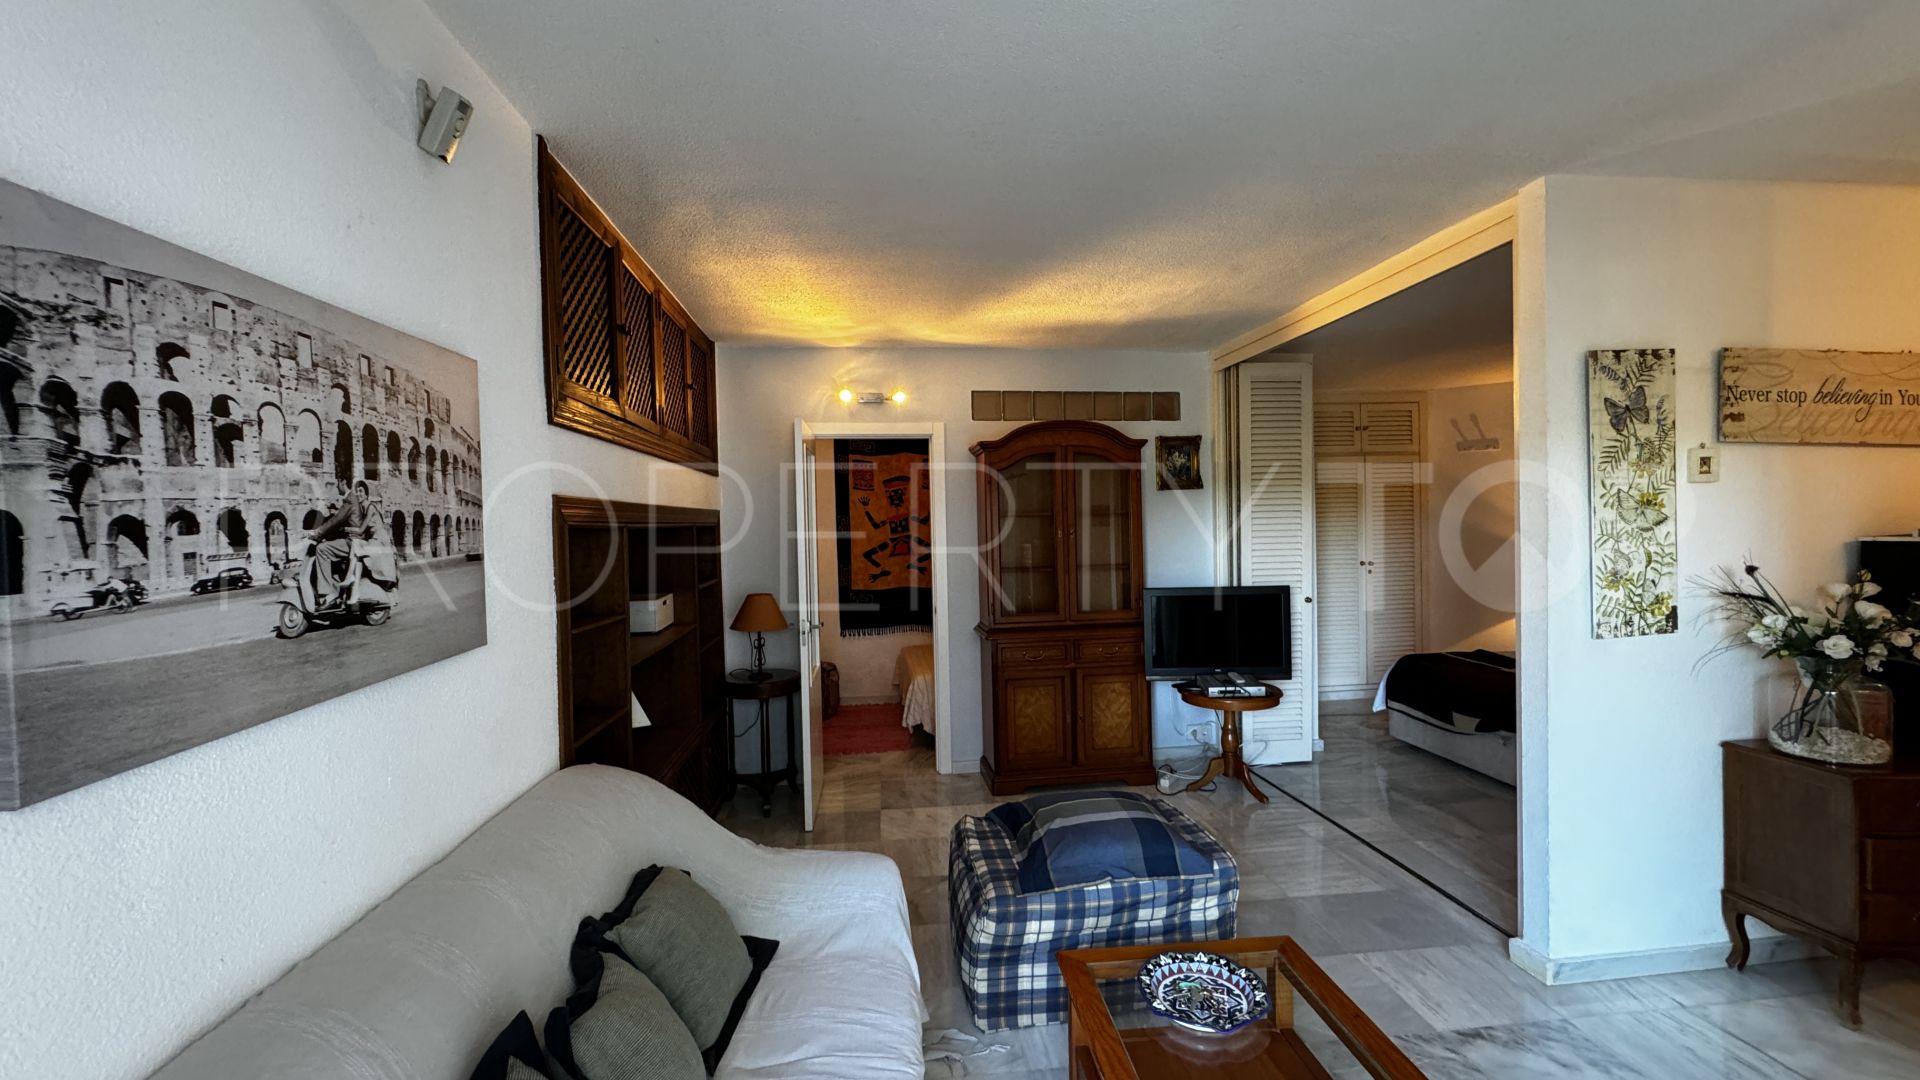 1 bedroom ground floor apartment in Coto Real for sale